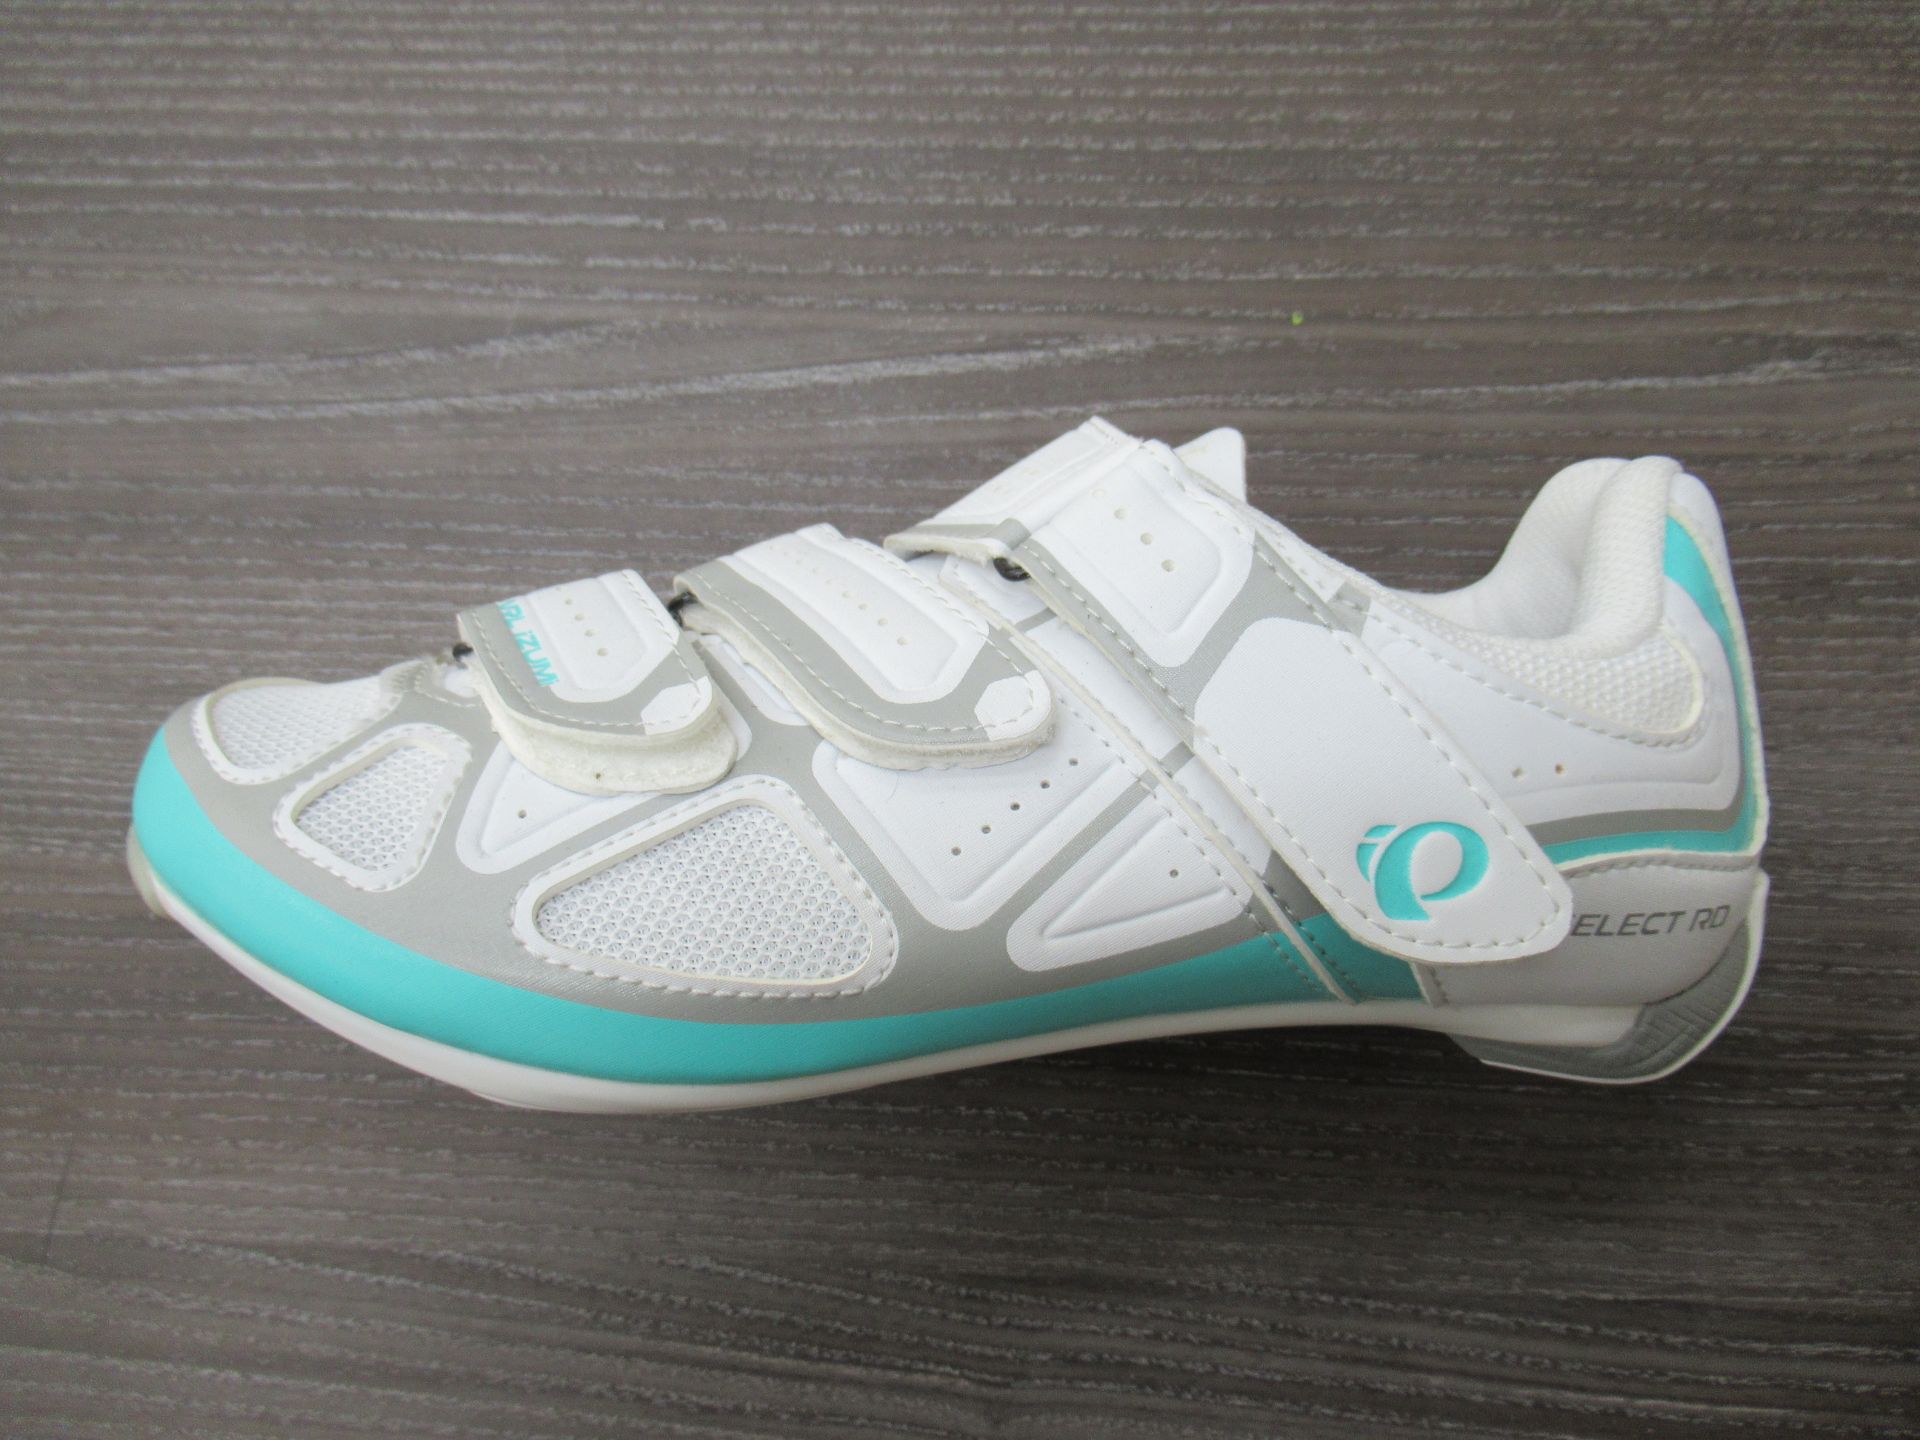 2 x Pairs of ladies cycling shoes: 1 x Lake MX100-W EU size 37 (RRP£79.99) and 1 x Pearl Izumi W Sel - Image 7 of 7